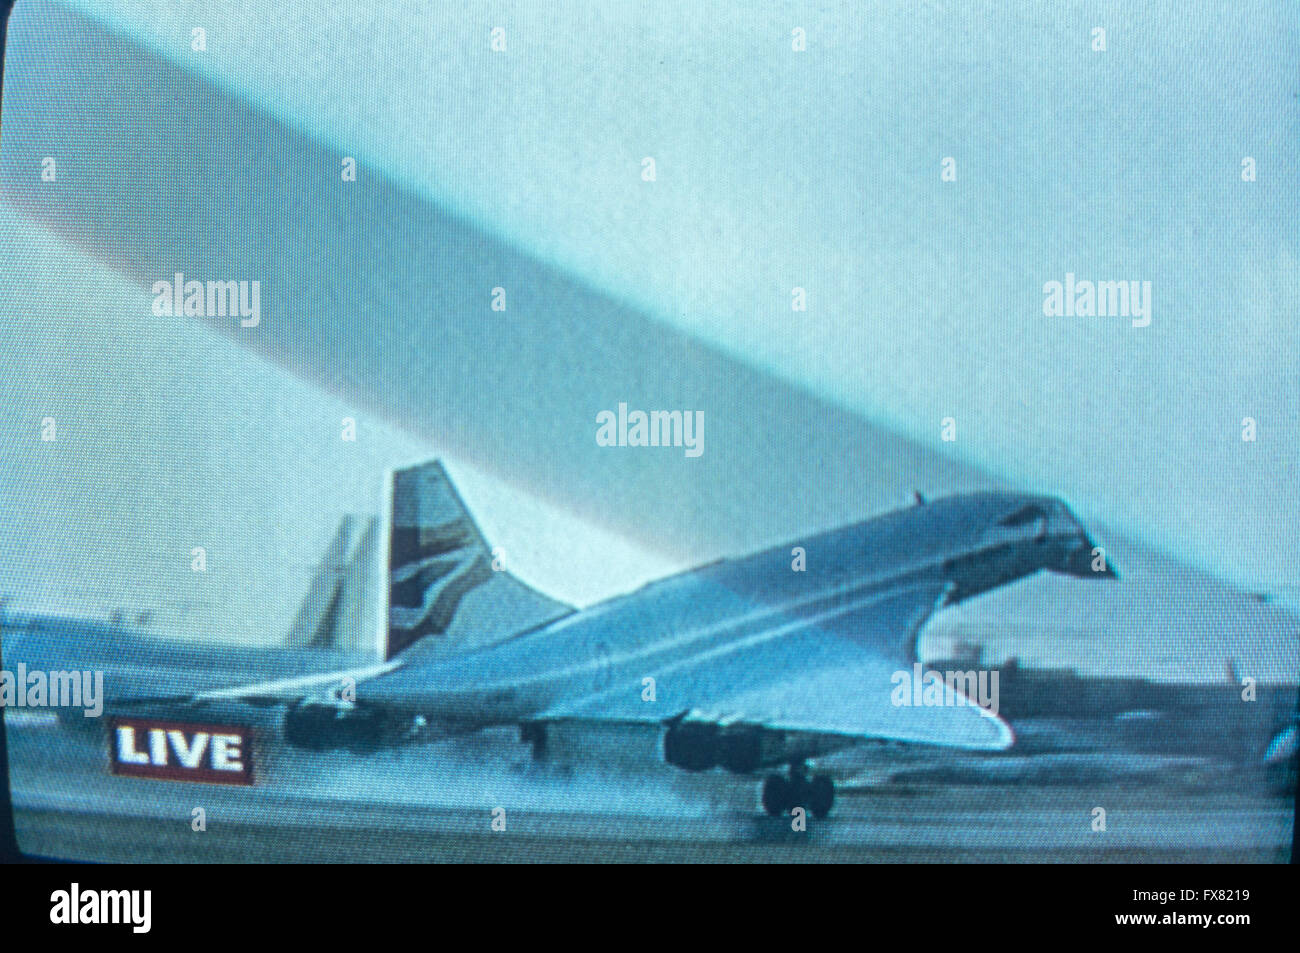 Archive image of last revenue flight of British Airways BAC/Aerospatiale Concorde,  G-BOAG, Speedbird 002 landing at London Heathrow, photographed from TV screen, BBC outside broadcast 24th. October 2003. BBC outside broadcast presented by Raymond Baxter. Now at museum of Flight, Seattle Stock Photo